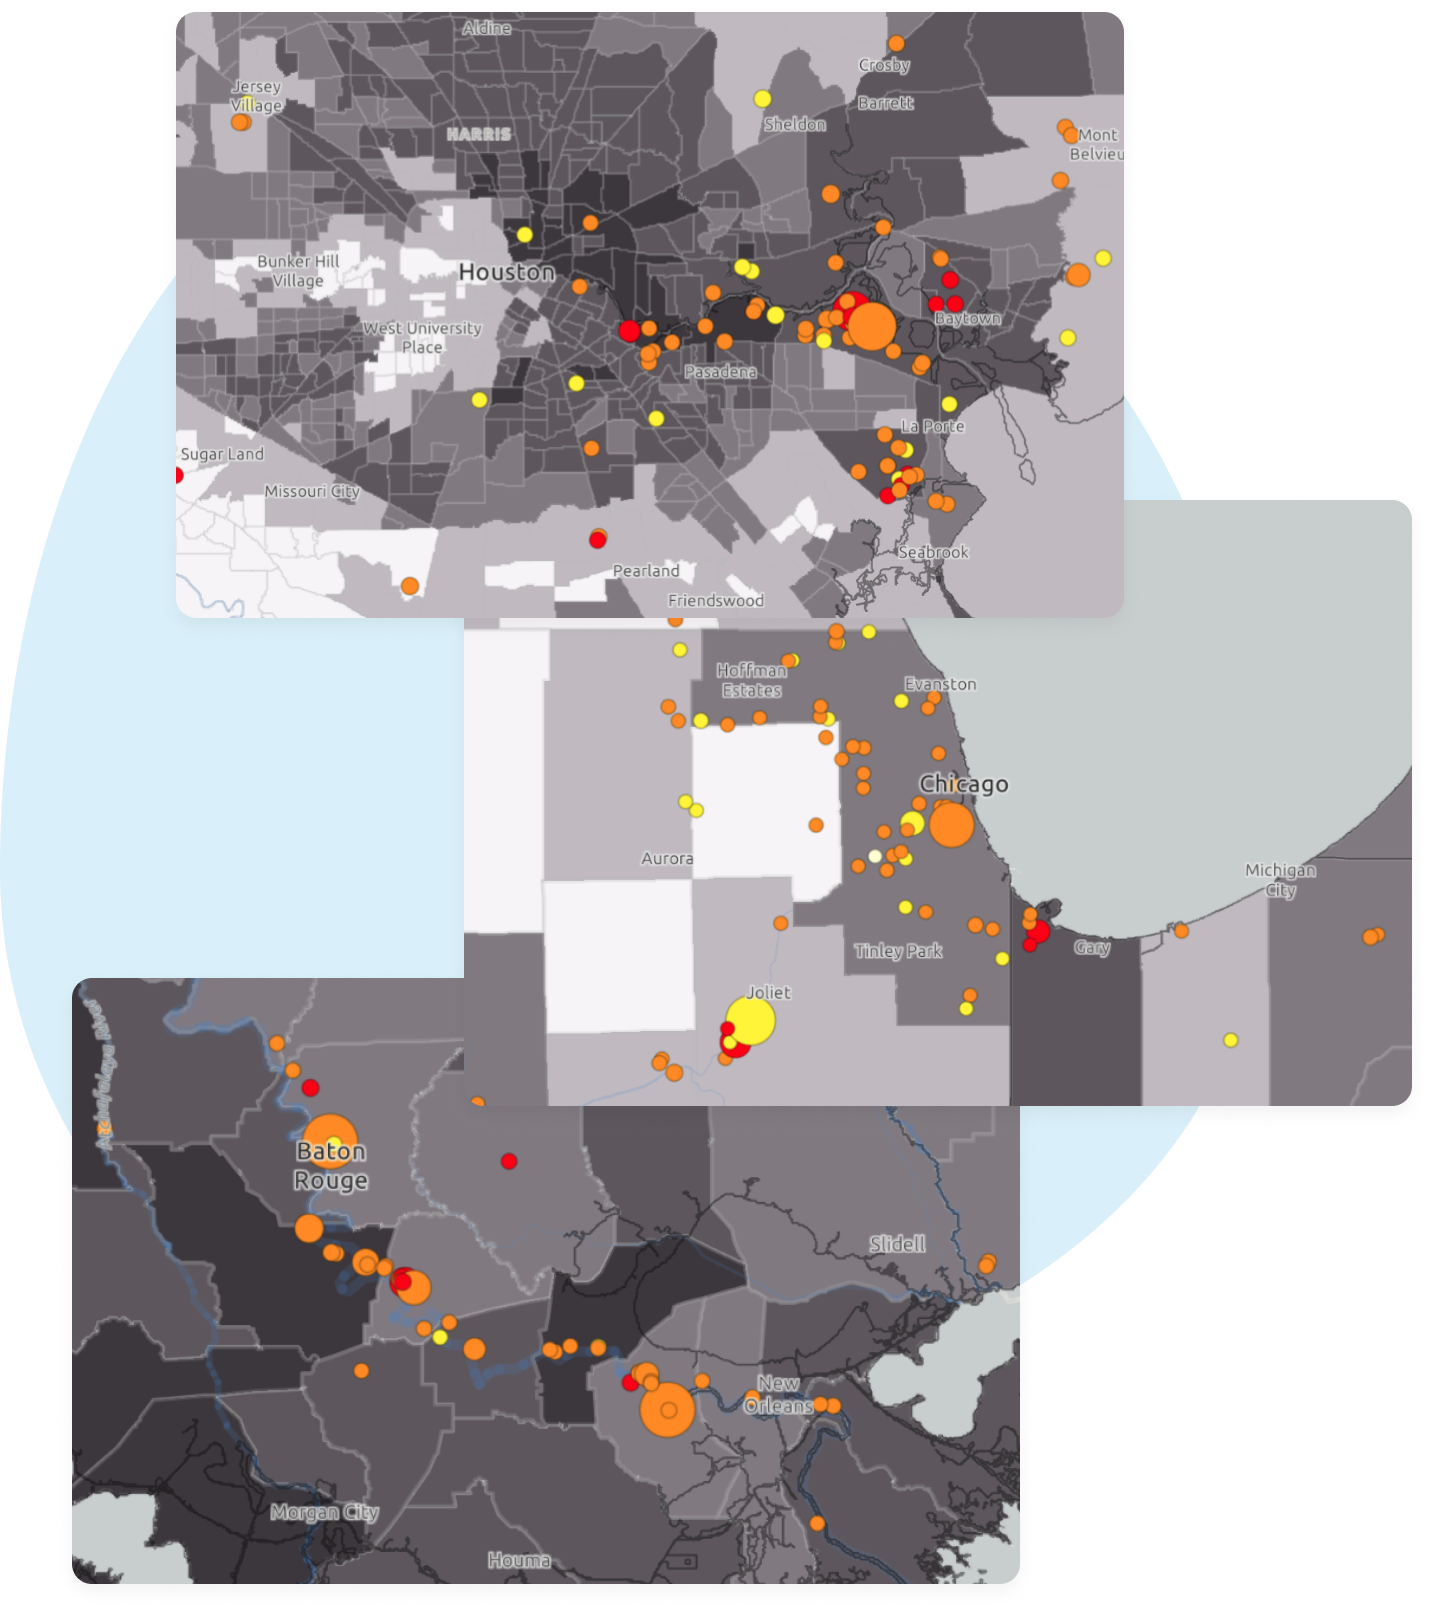 Images of EDF's Chemical Exposure action map showing Houston, Chicago, Baton Rouge and the surrounding areas.